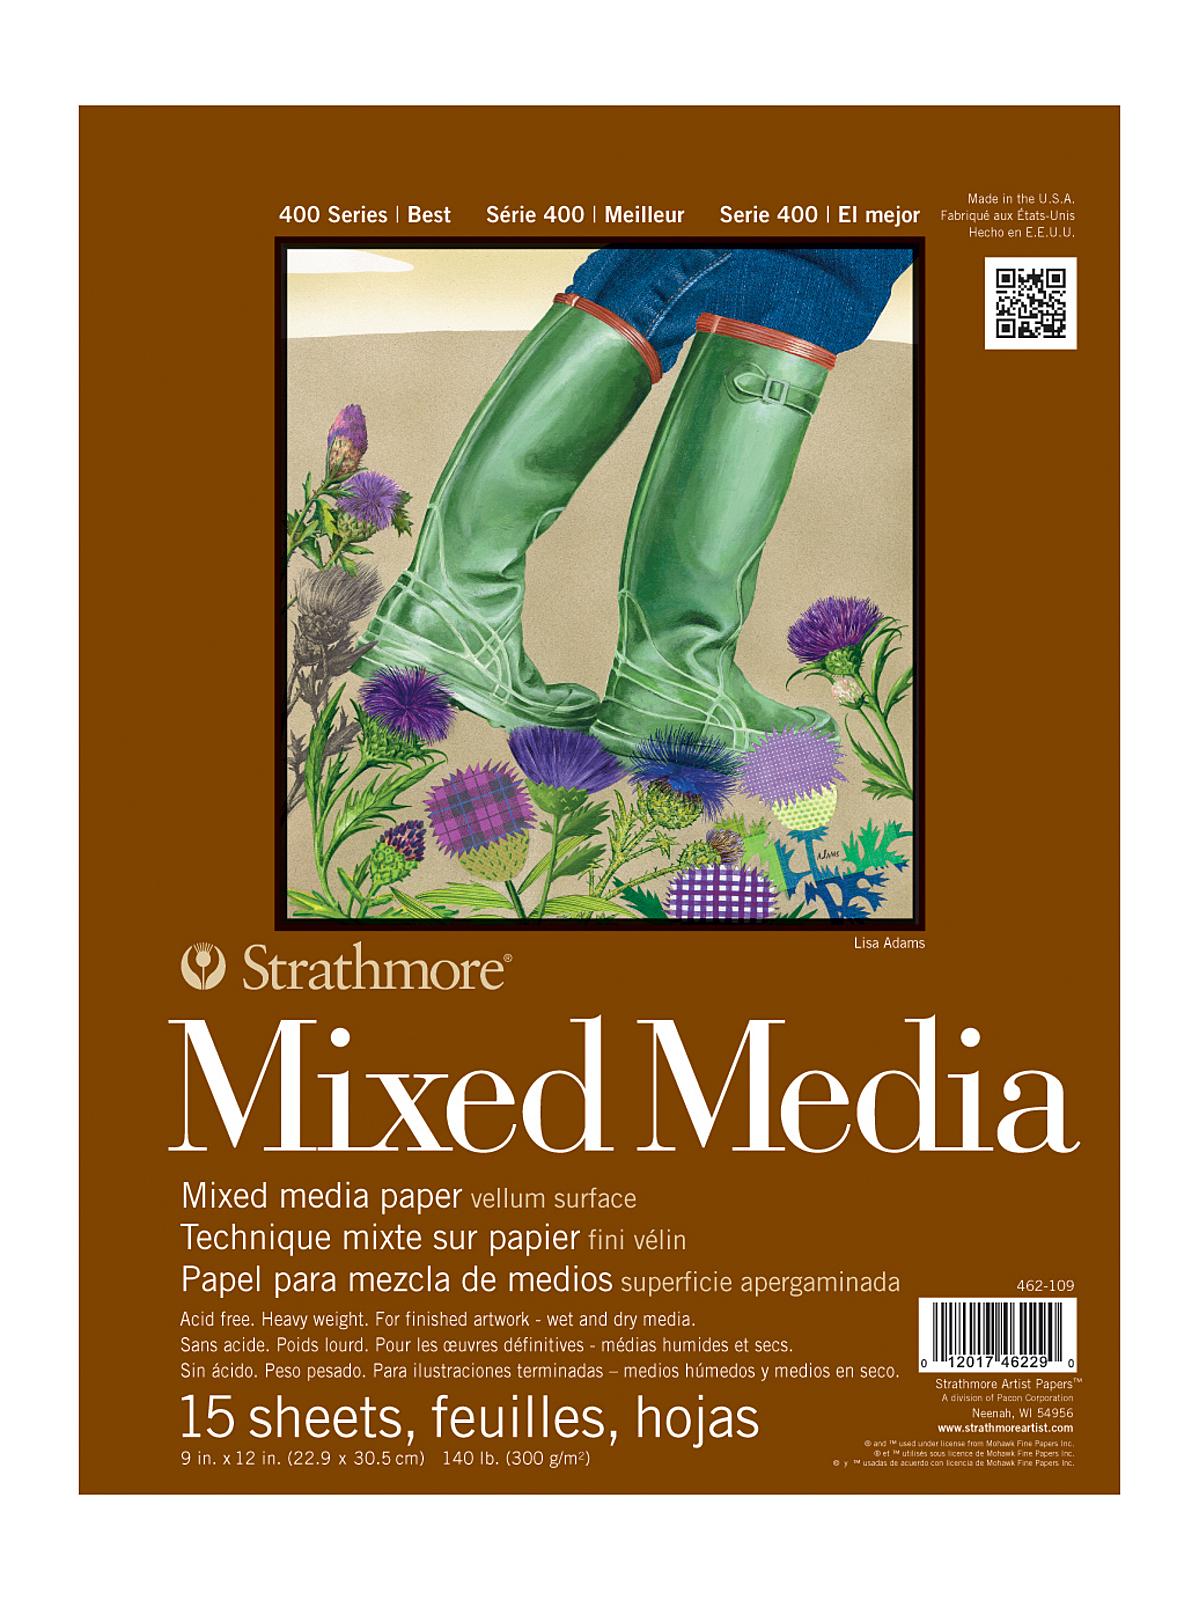 400 Series Mixed Media Pad 9 In. X 12 In. 15 Sheets